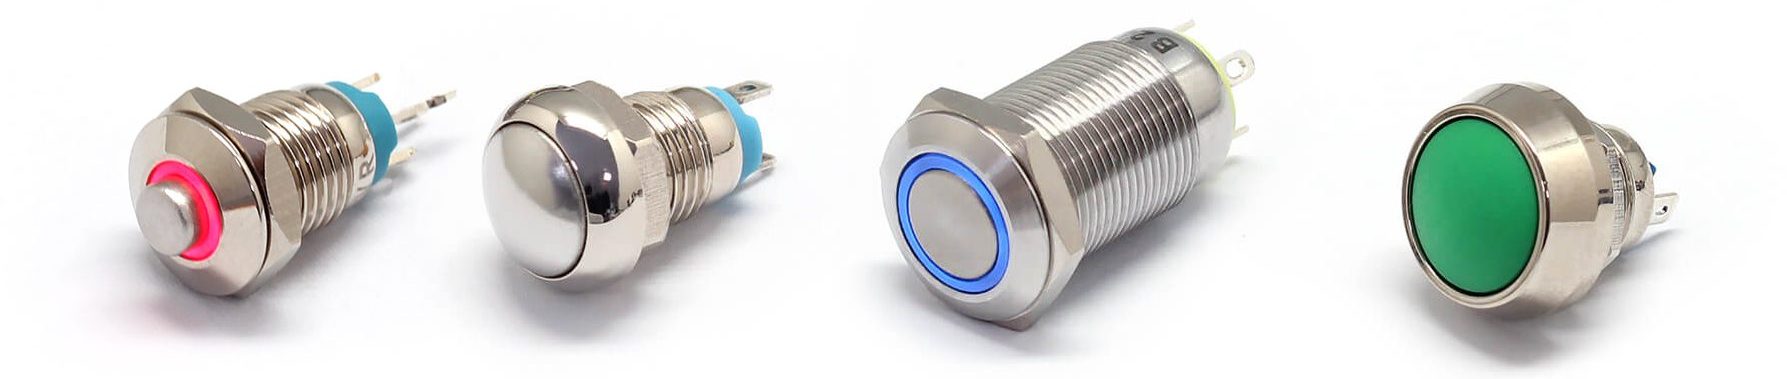 small momentary push button switch